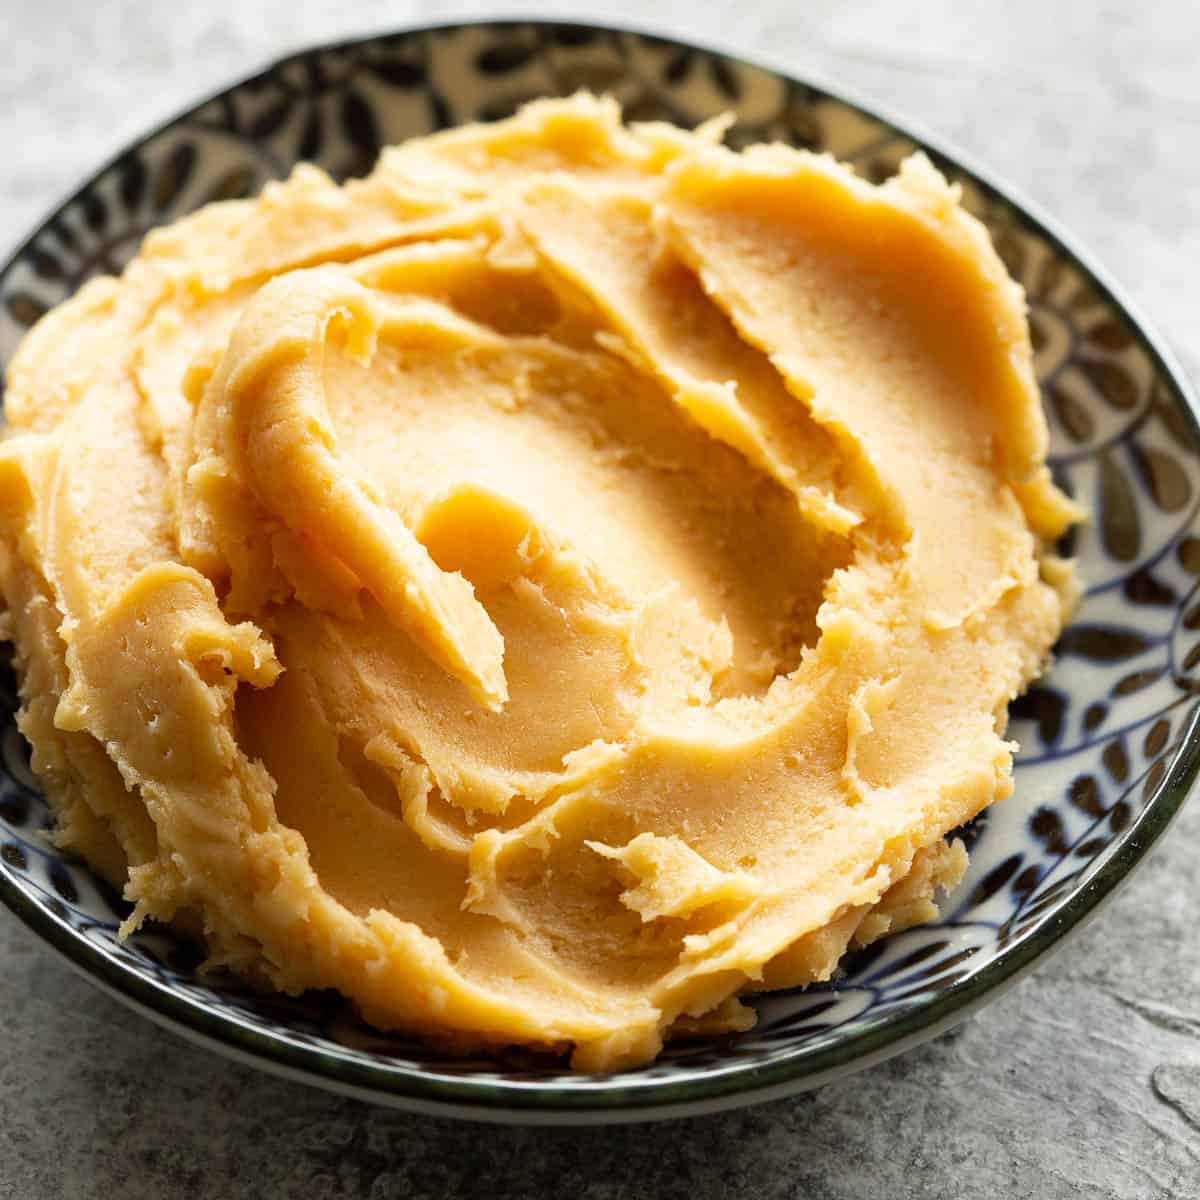 Golden and creamy miso butter in a dish, ready to use.